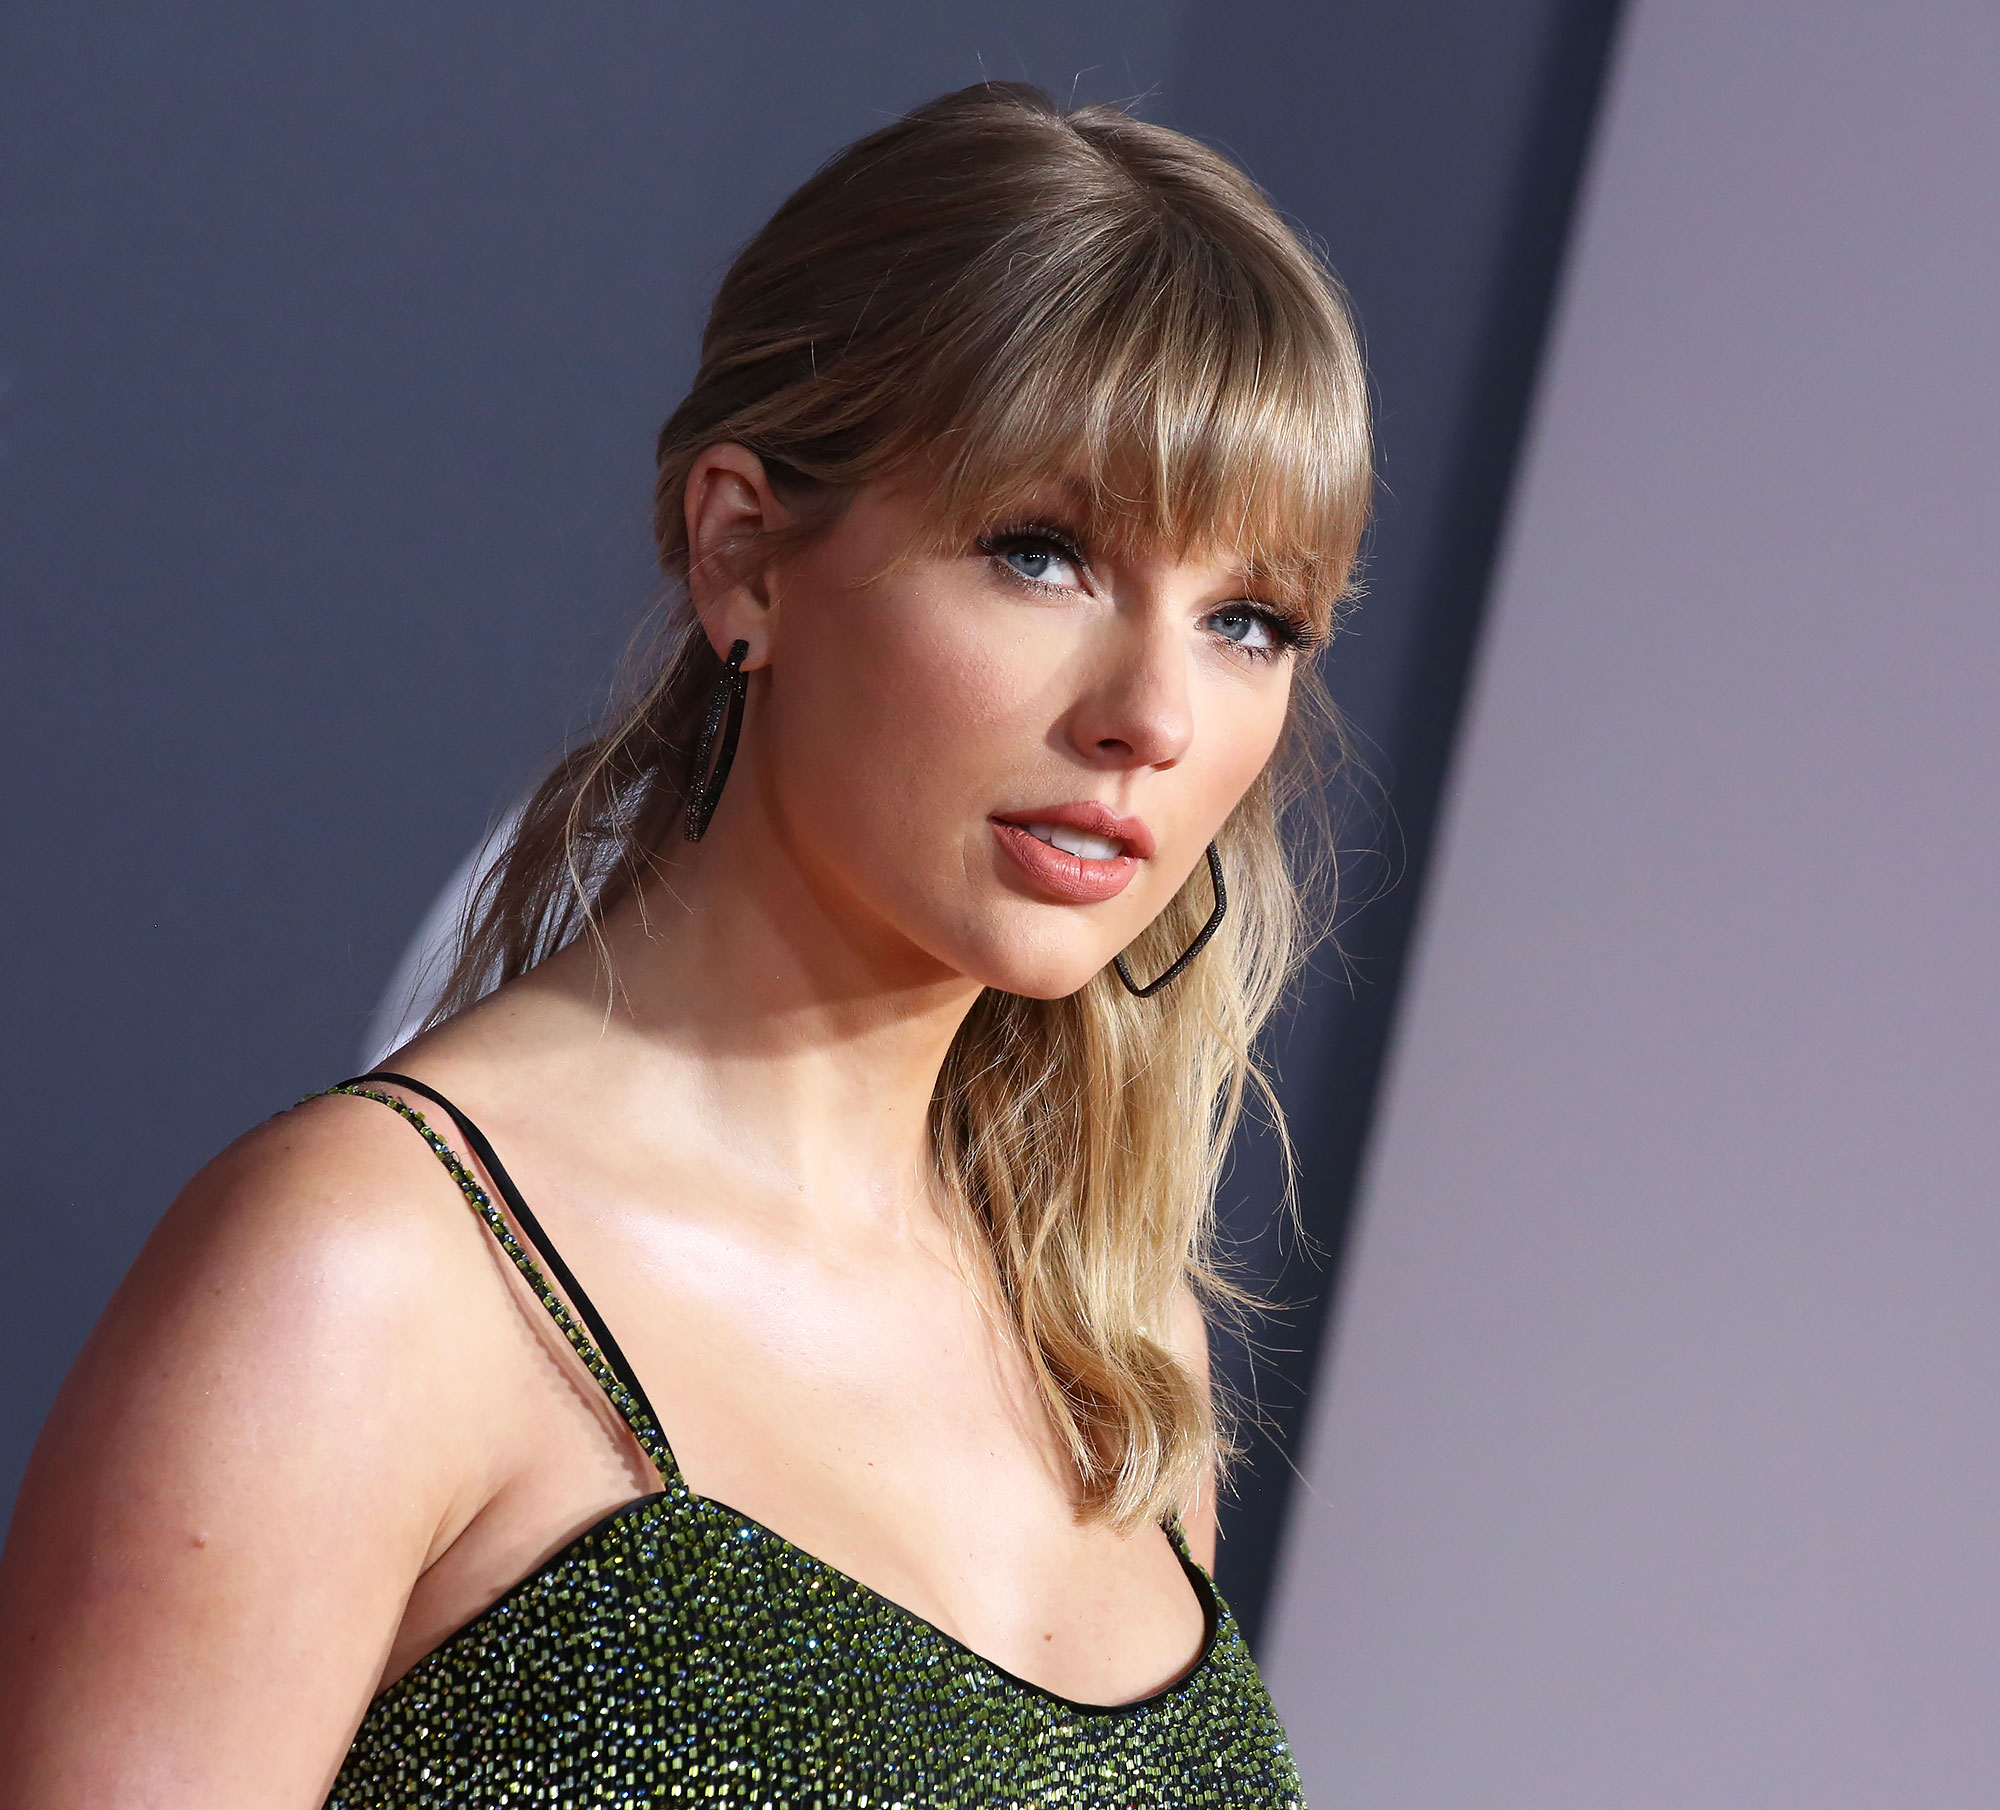 Taylor Swift's Version of 'Fearless' Decoded: New Songs, Lyrics